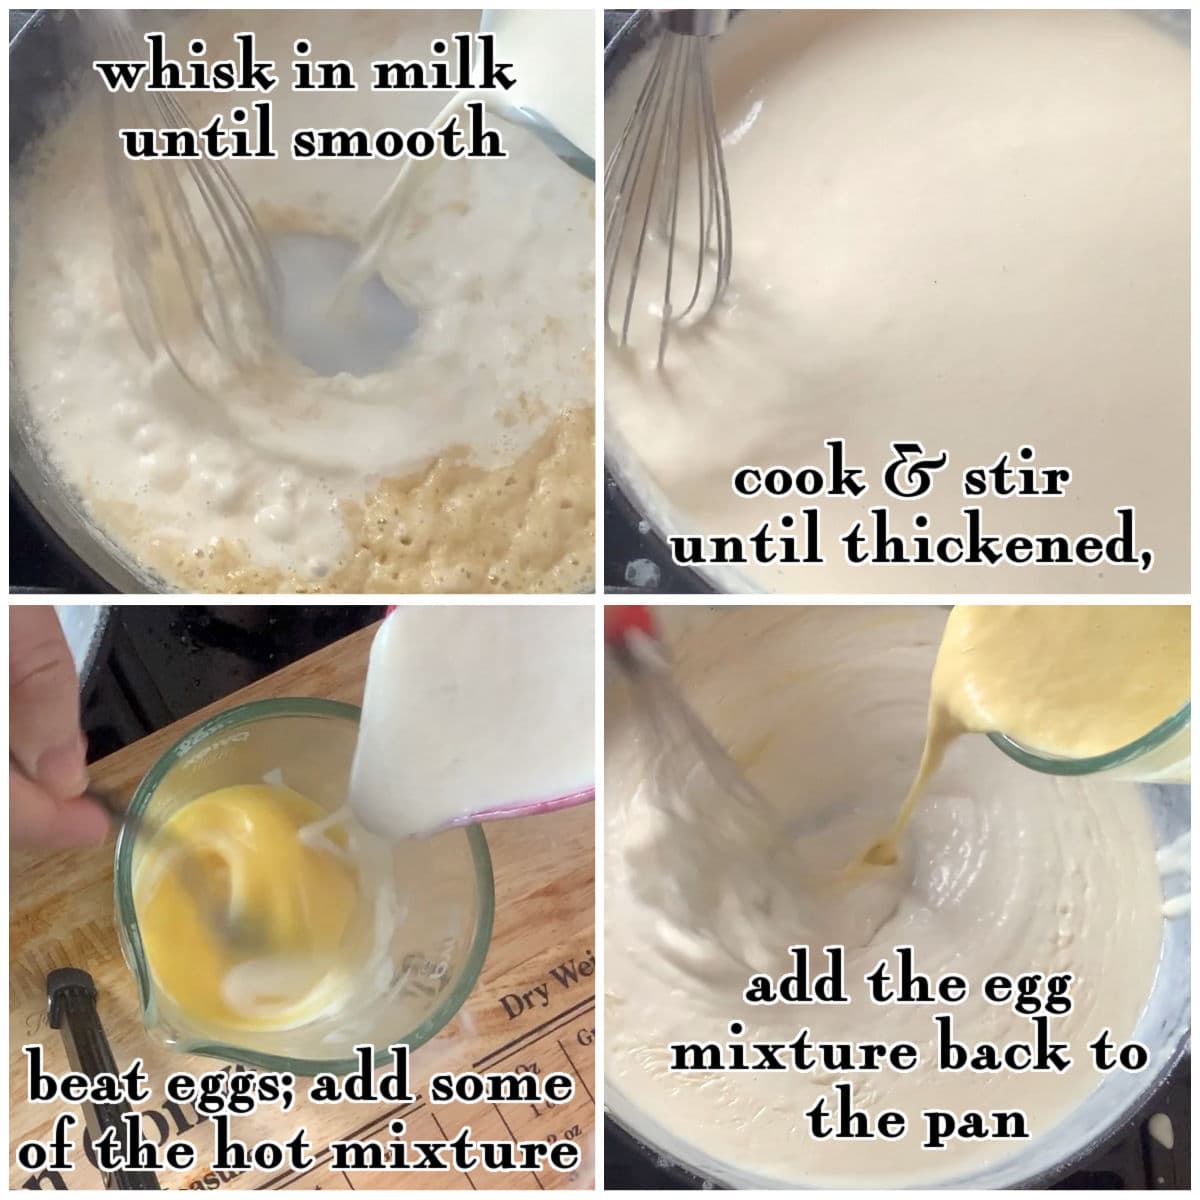 Steps 5 through 8 of making the roux.